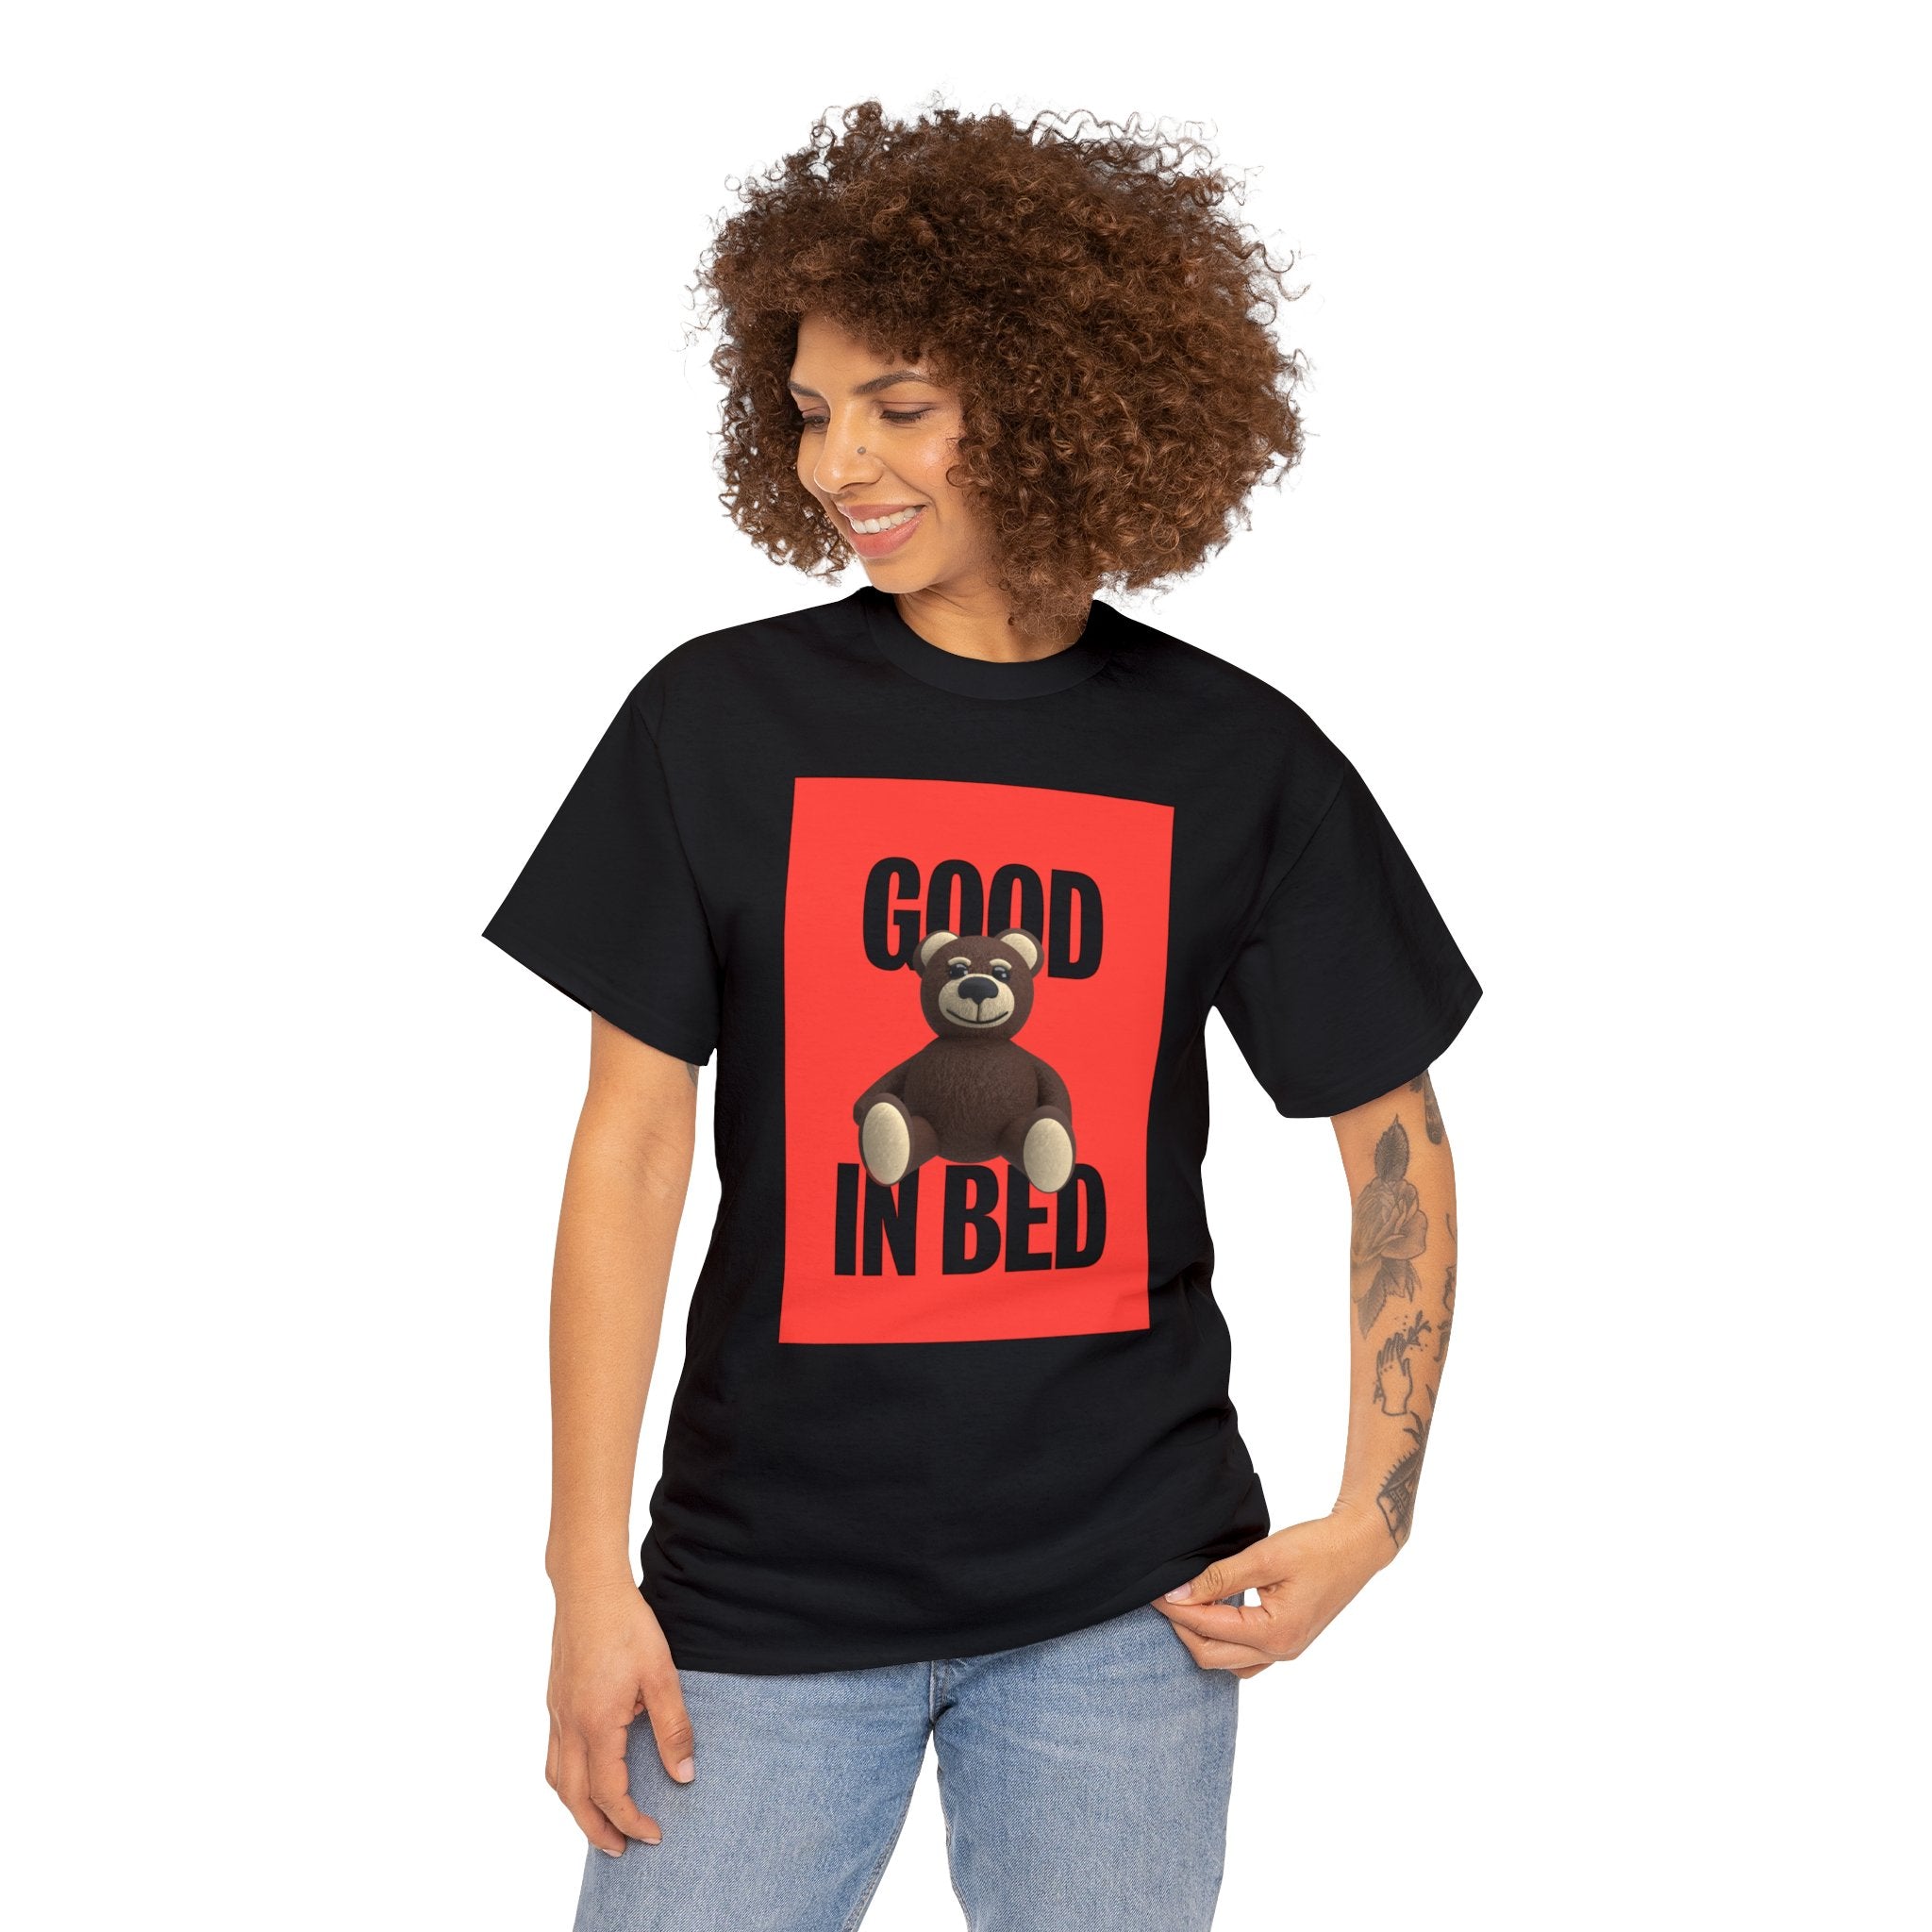 good in bed shirt with our female model